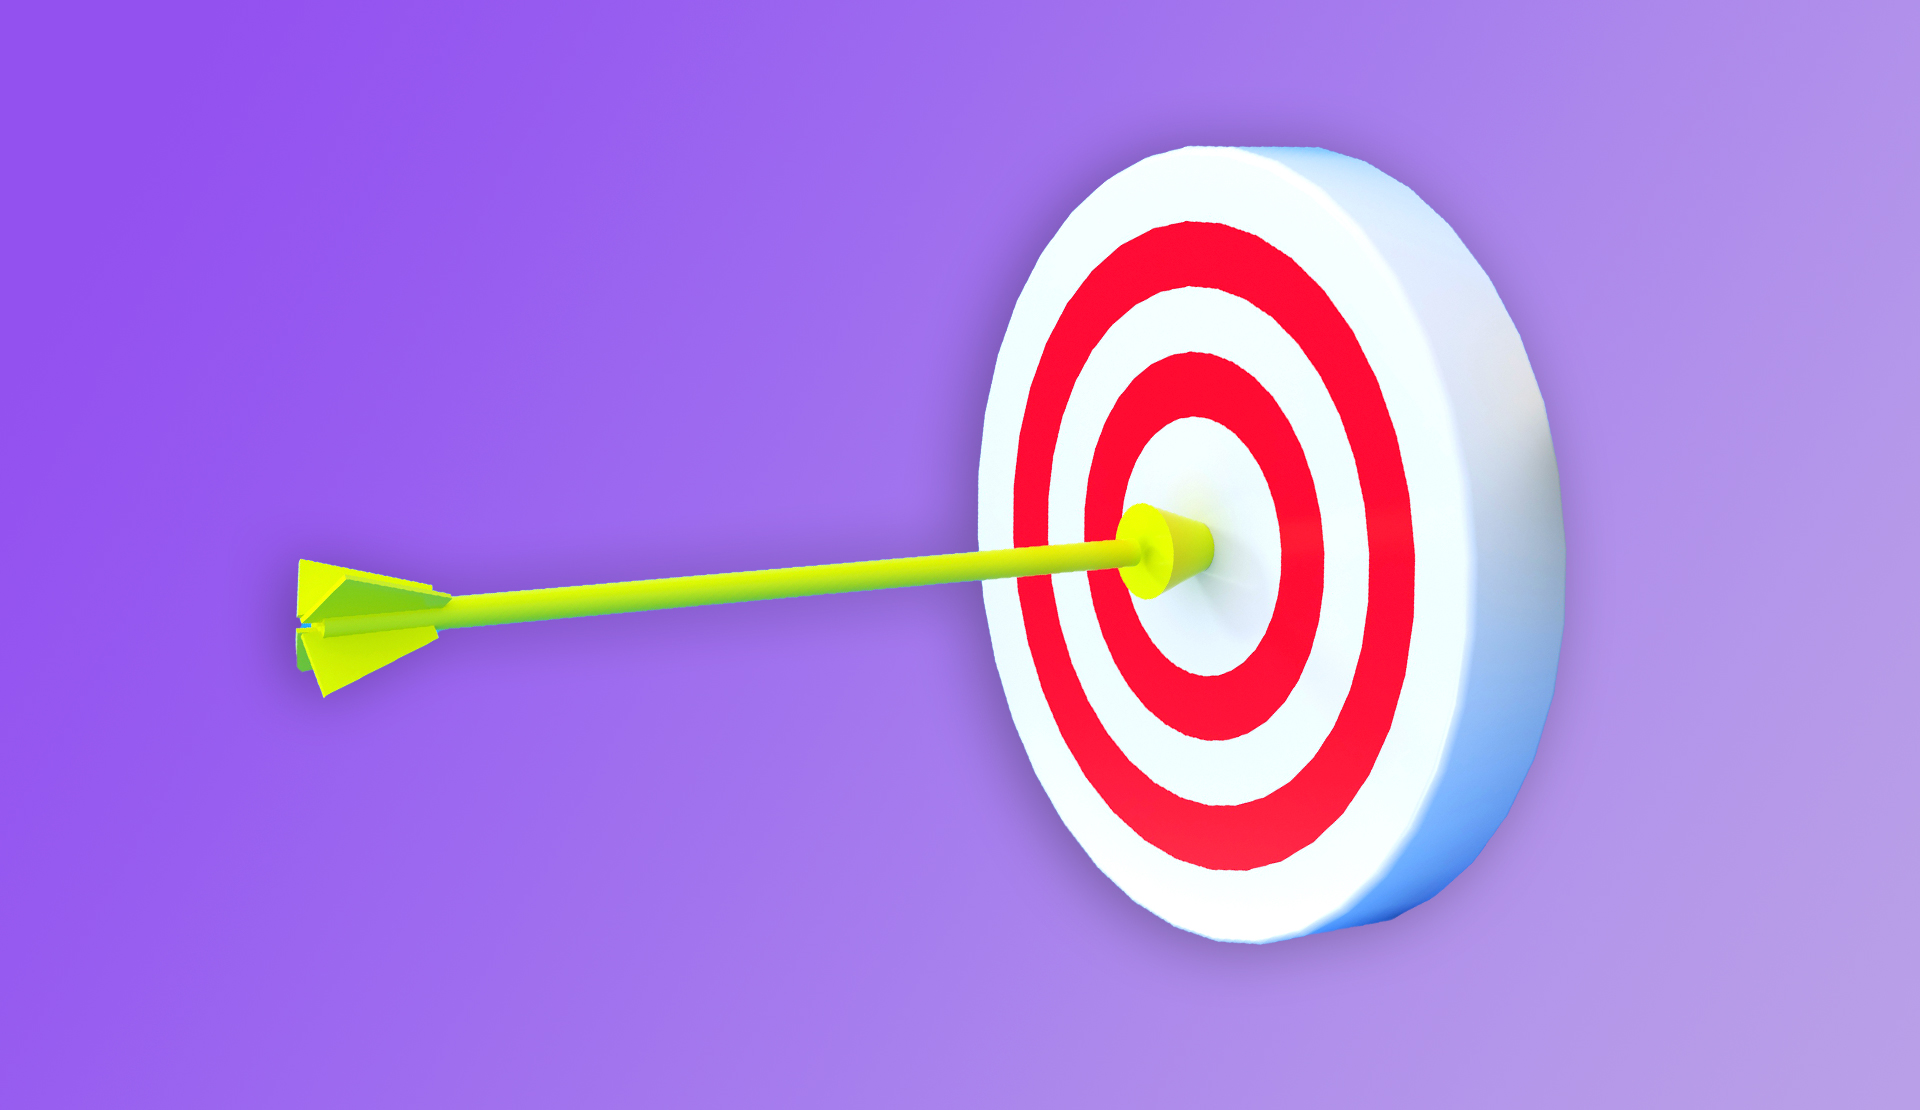 graphic of an arrow hitting the bulls eye on a target to symbolise setting goals and objectives